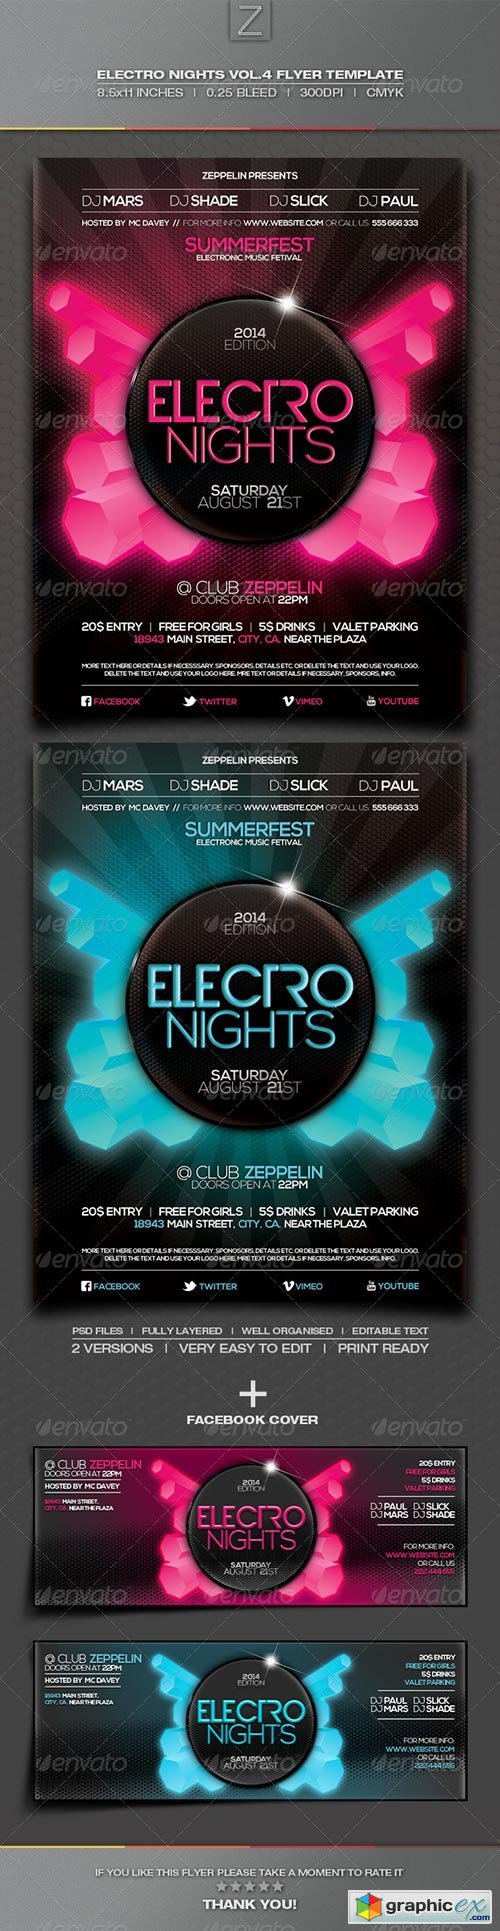 Electro Nights Vol.4 Flyer Template